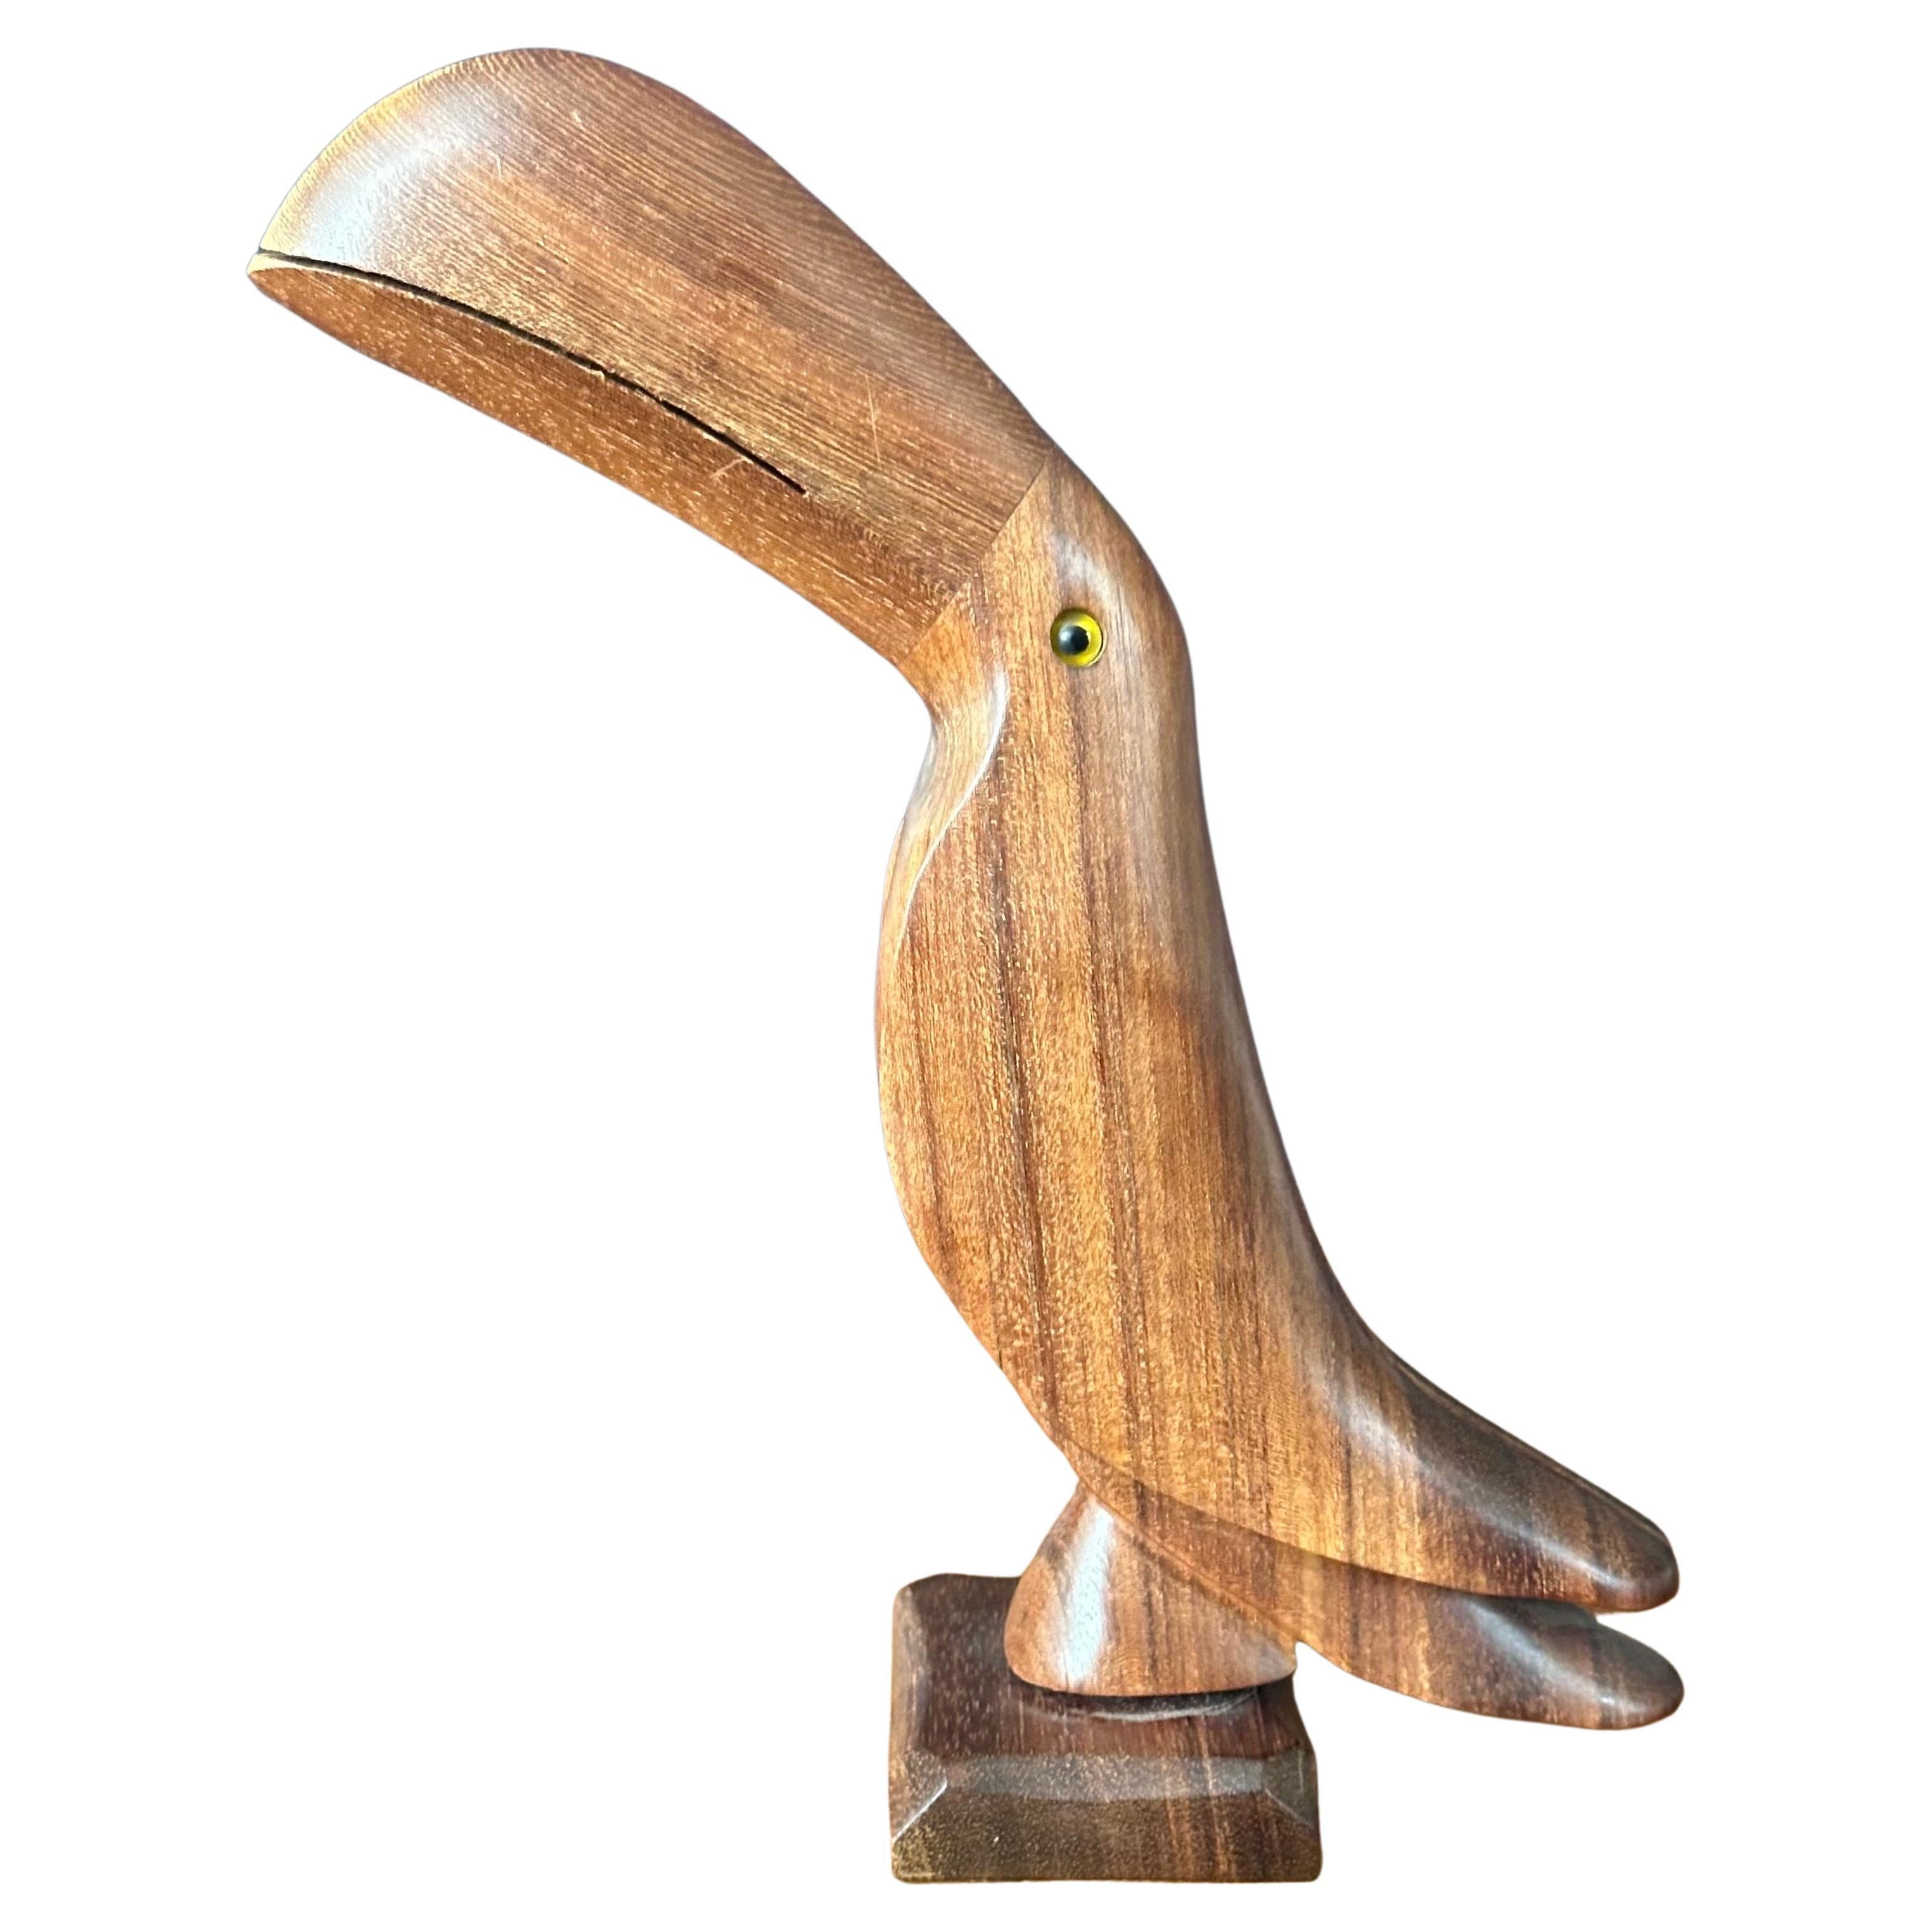  A very nice mid-century modern walnut toucan sculpture, circa 1970s. The piece is very well crafted, in good vintage condition and measures 8